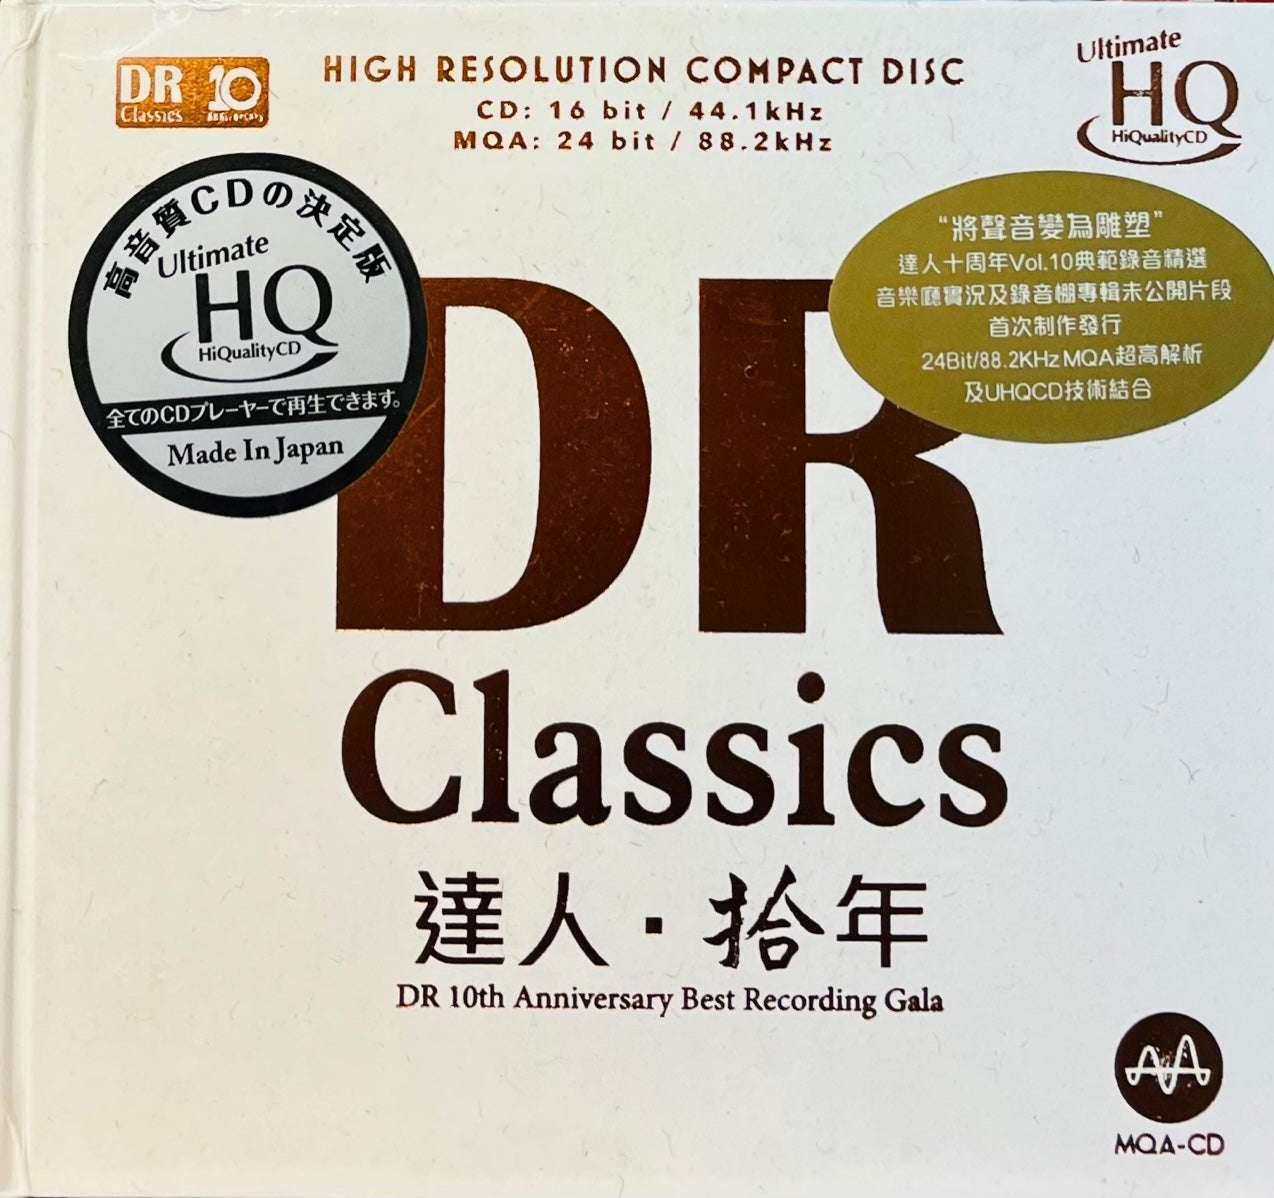 DR. CLASSICS 10TH ANNIVERSARY BEST RECORDING GALA (UHQCD) MADE IN JAPAN